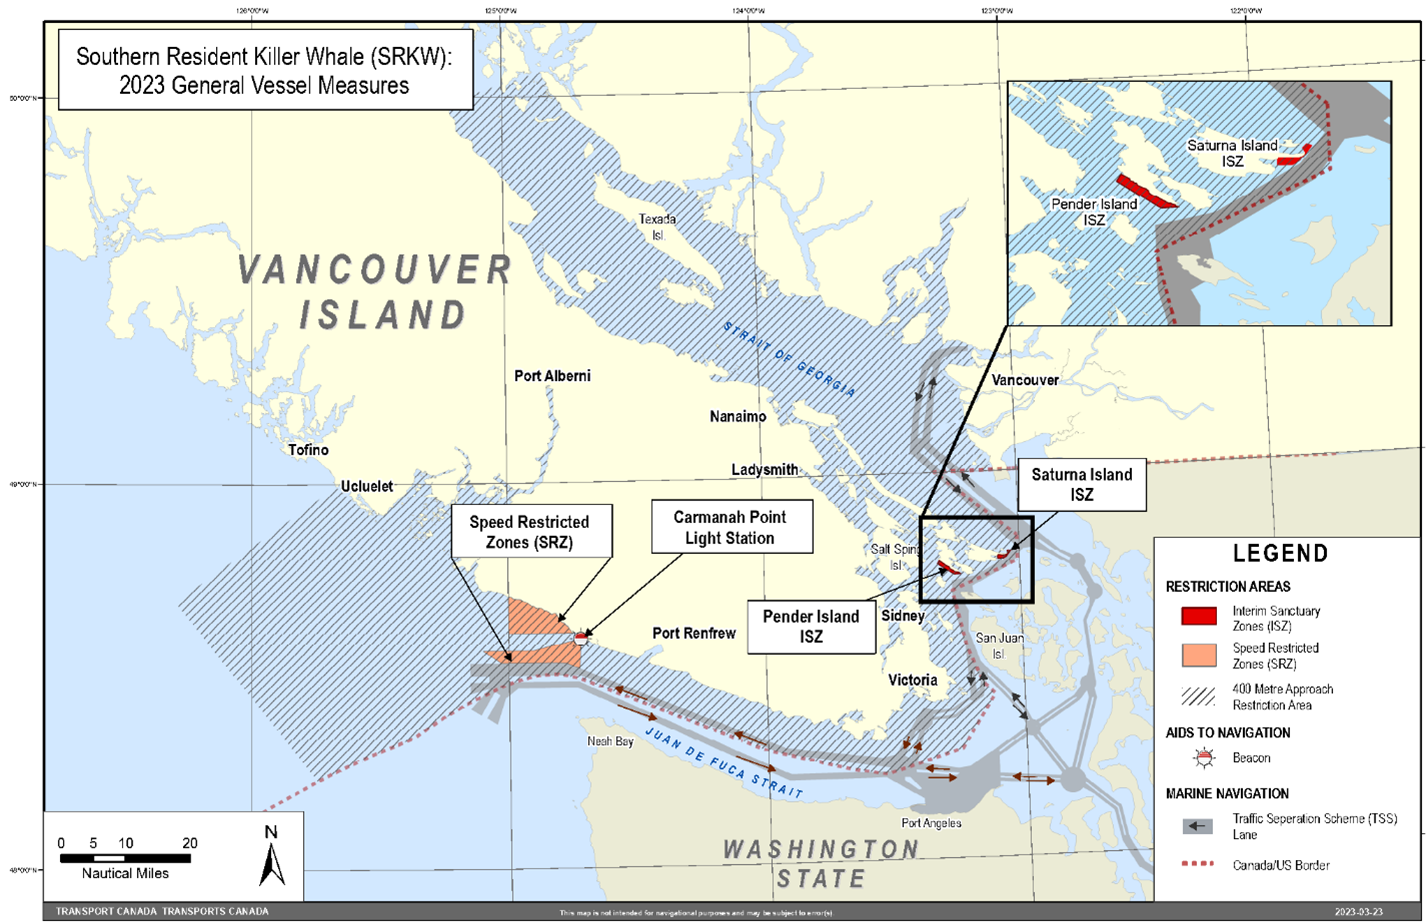 Rectangular map in grey, blue and yellow showing the general vessel measures for the Southern Resident Killer Whale around Vancouver Island and Washington State. 